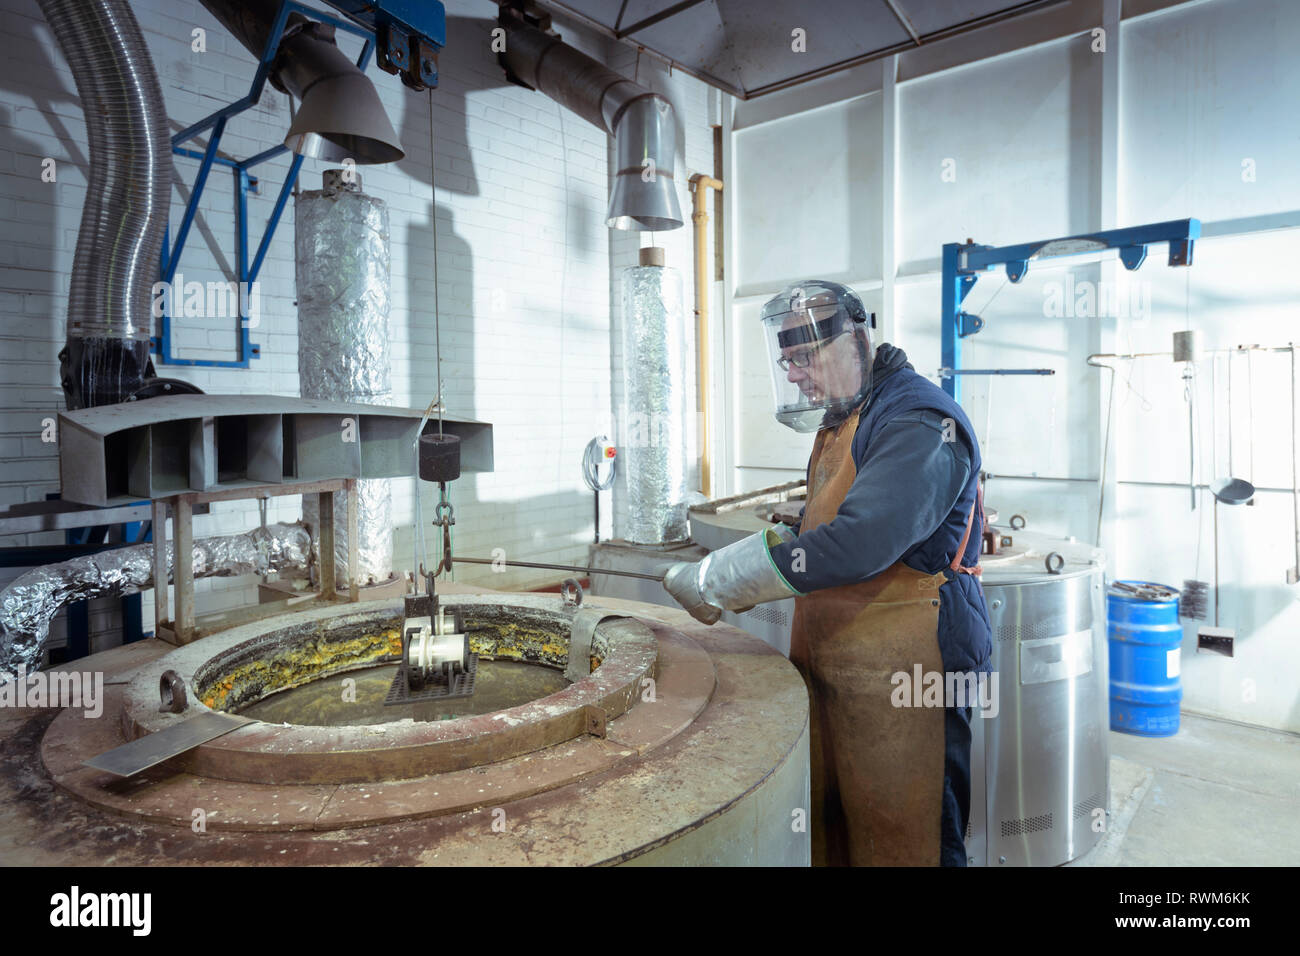 Engineer dipping components into molten salt in engineering factory Stock Photo